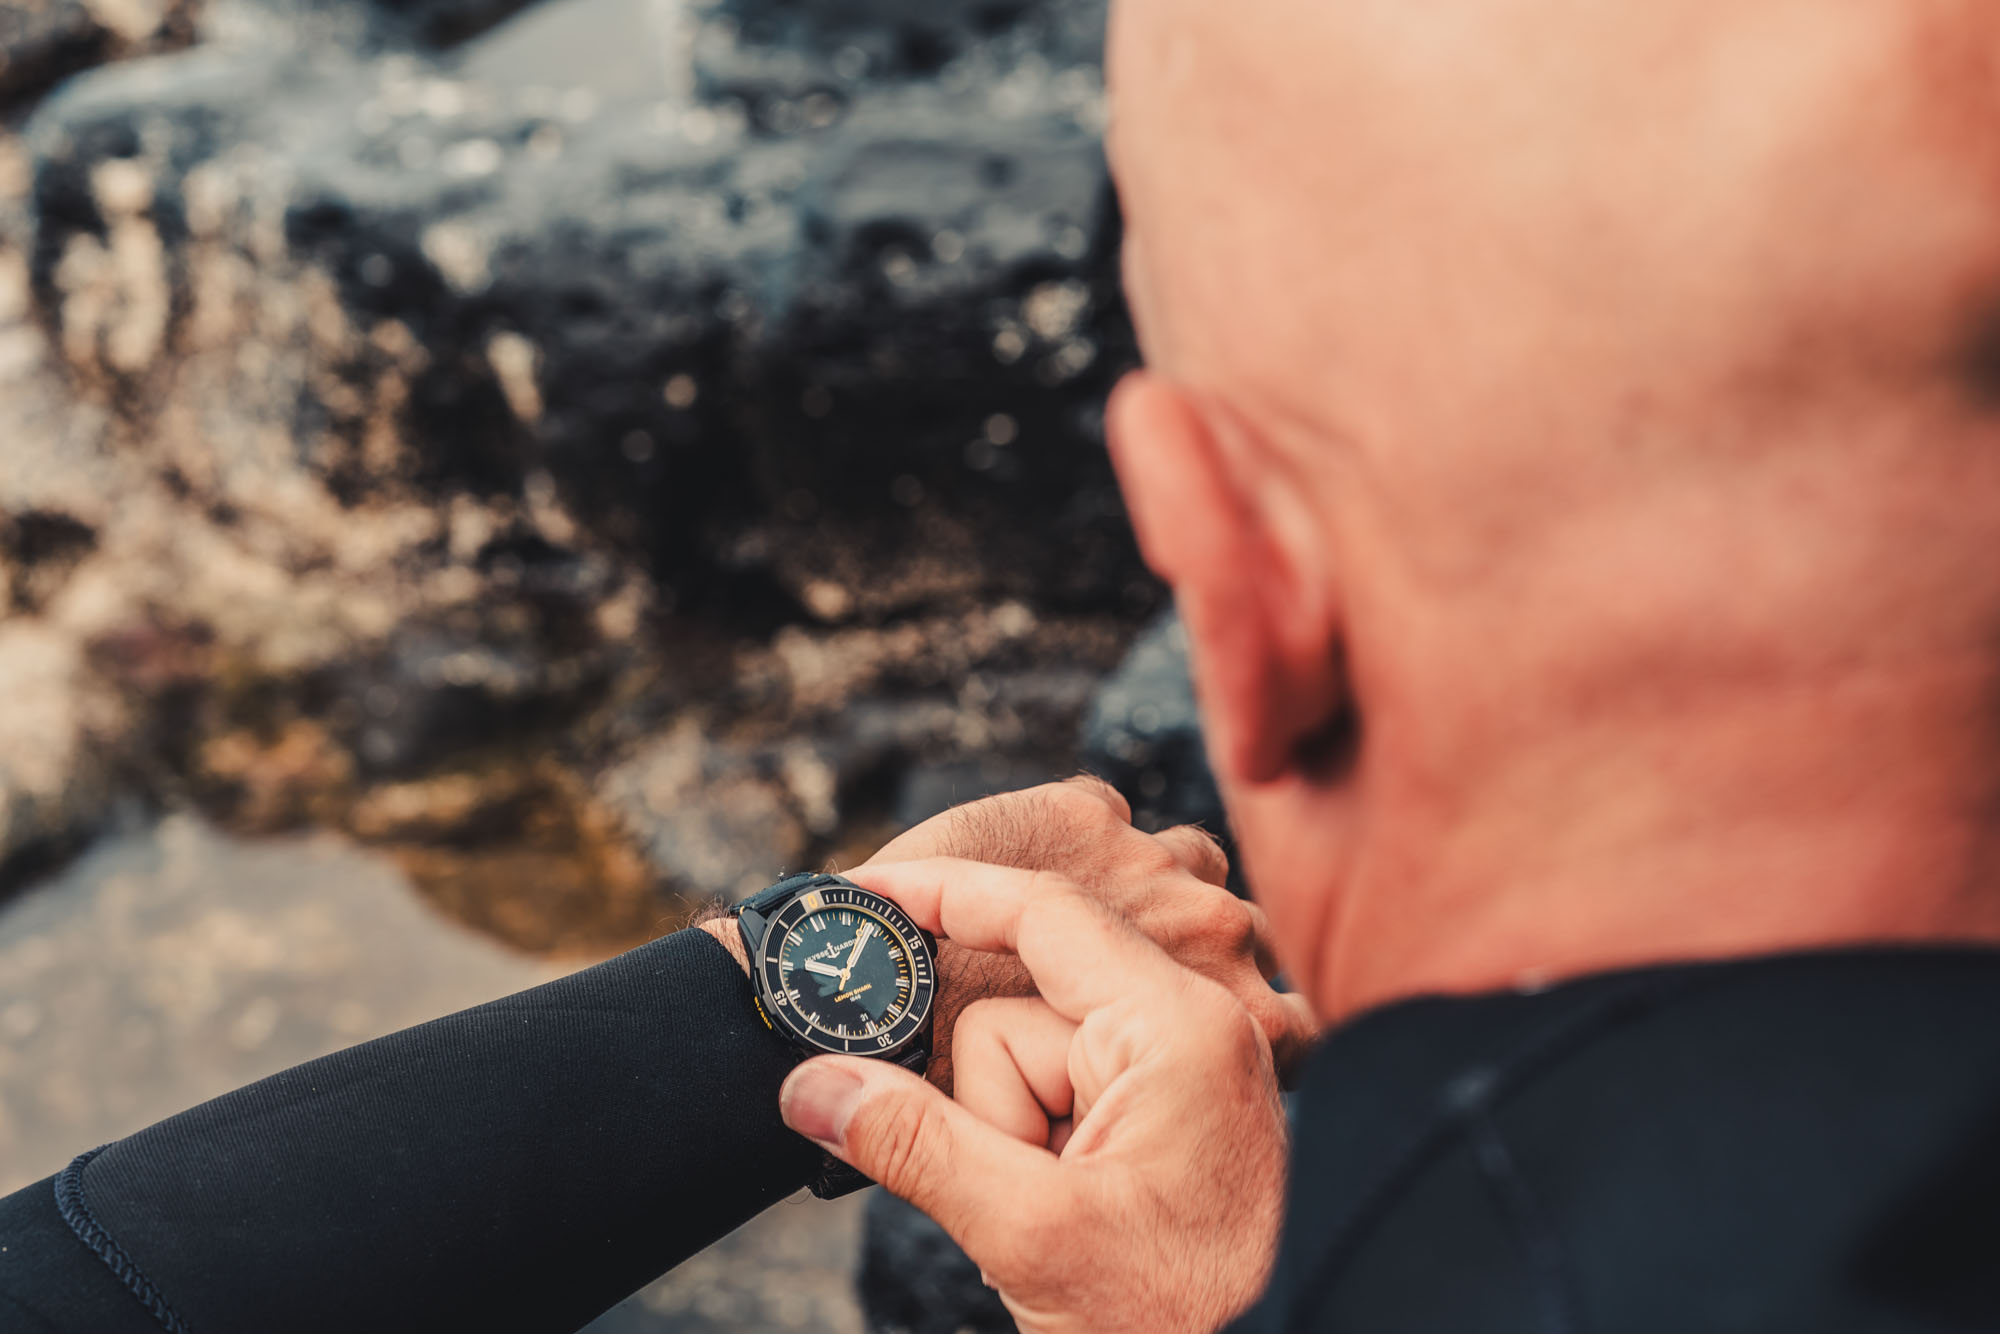 Photographer Fred Buyle, ocean explorer and friend of Ulysse Nardin